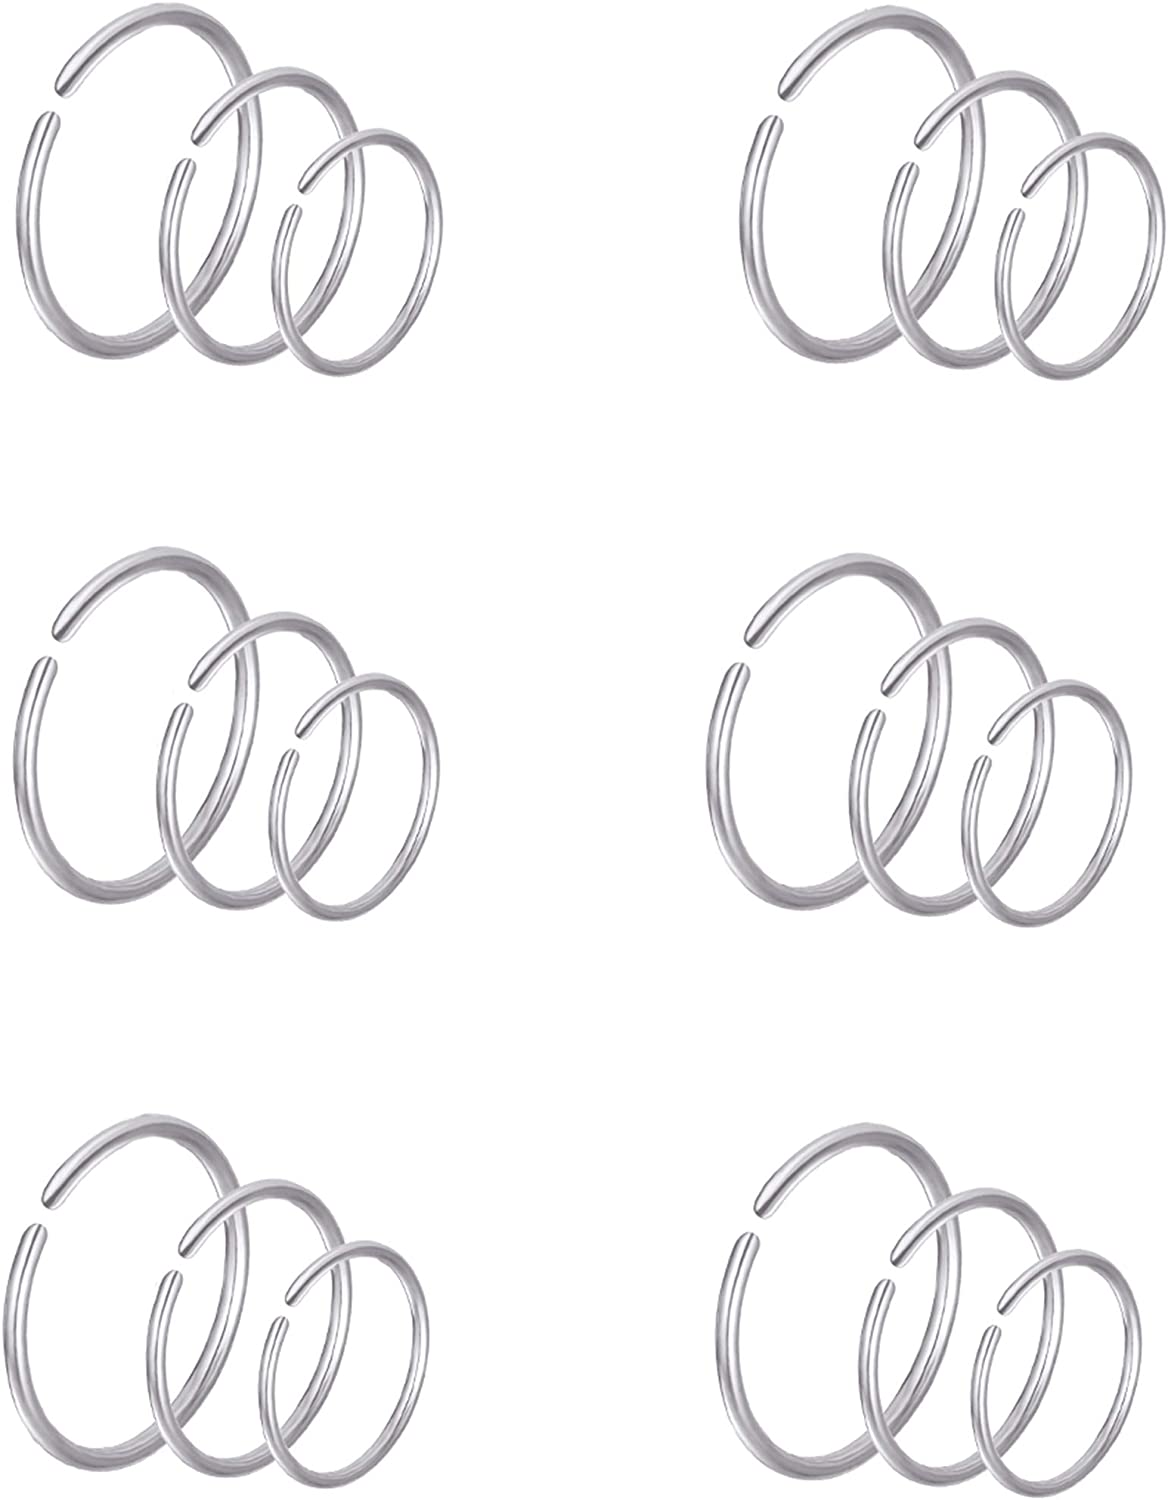 Ofeiyaa 24Pcs 18G 20G 22G Stainless Steel Nose Ring Hoop Cartilage Earrings Septum Ear Traguse Lip Ring Body Piercing Jewelry 6-12mm Slive Stone